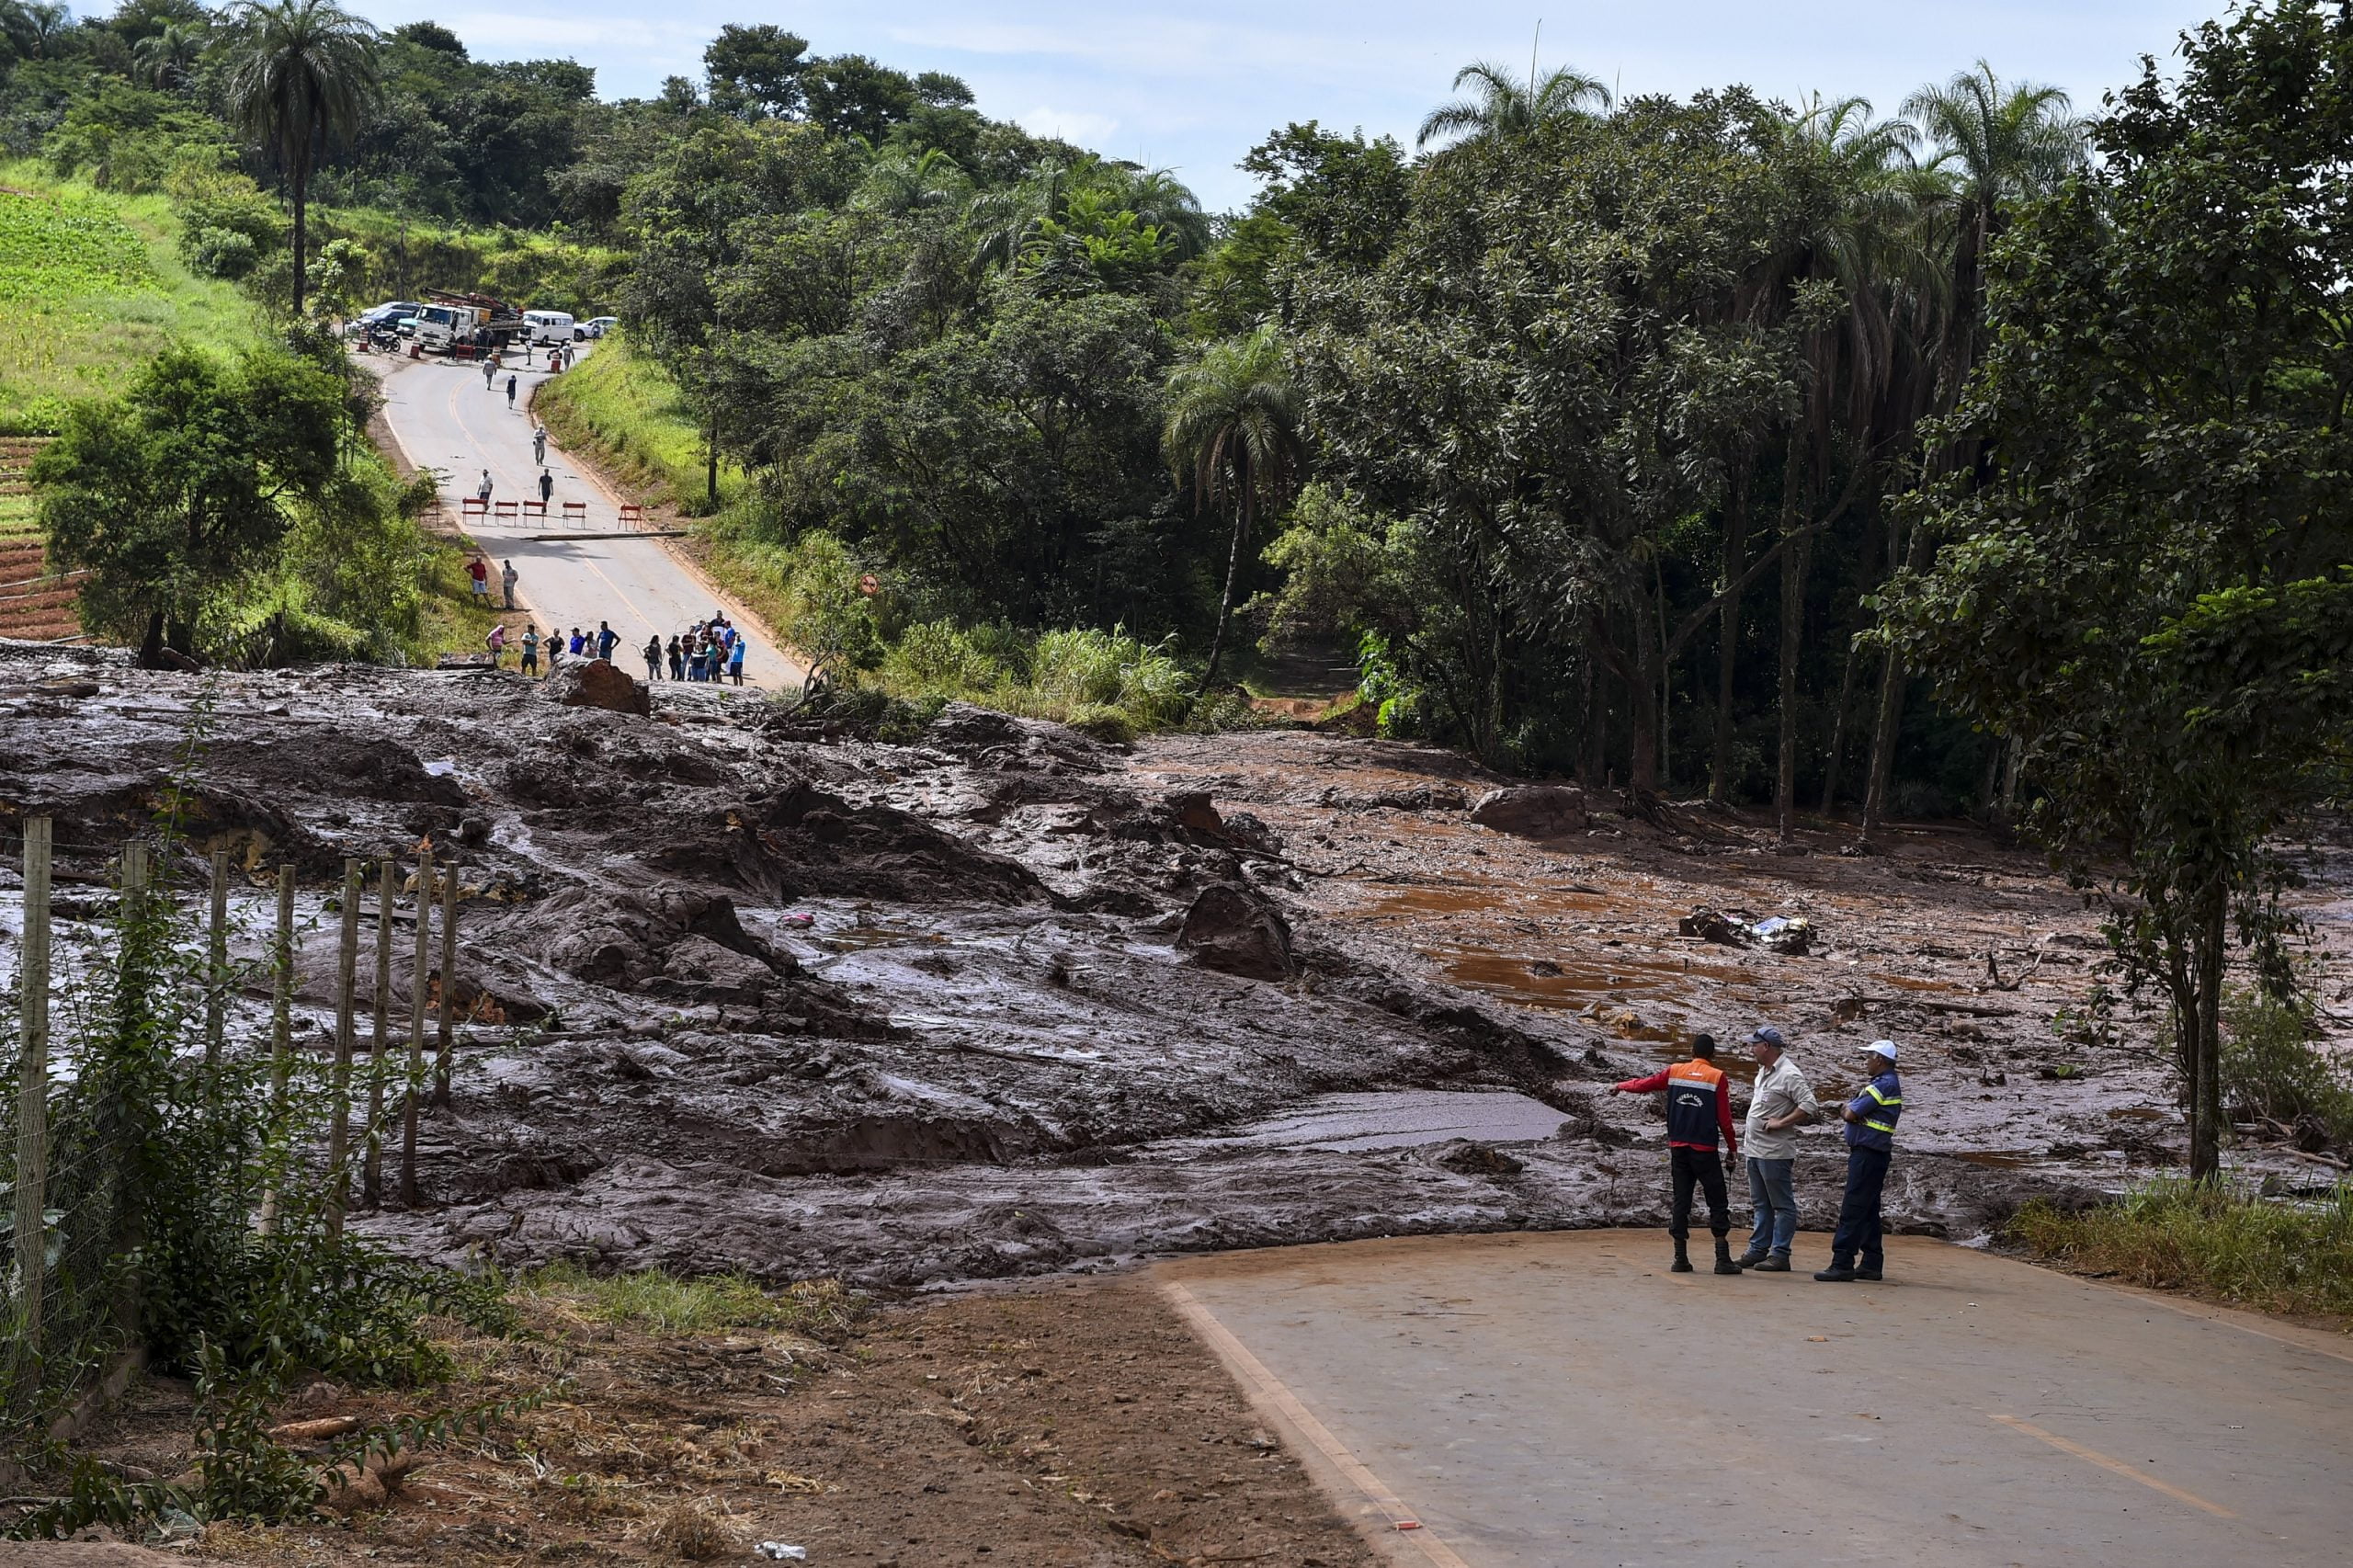 At least 300 missing after mining dam bursts in Brazil